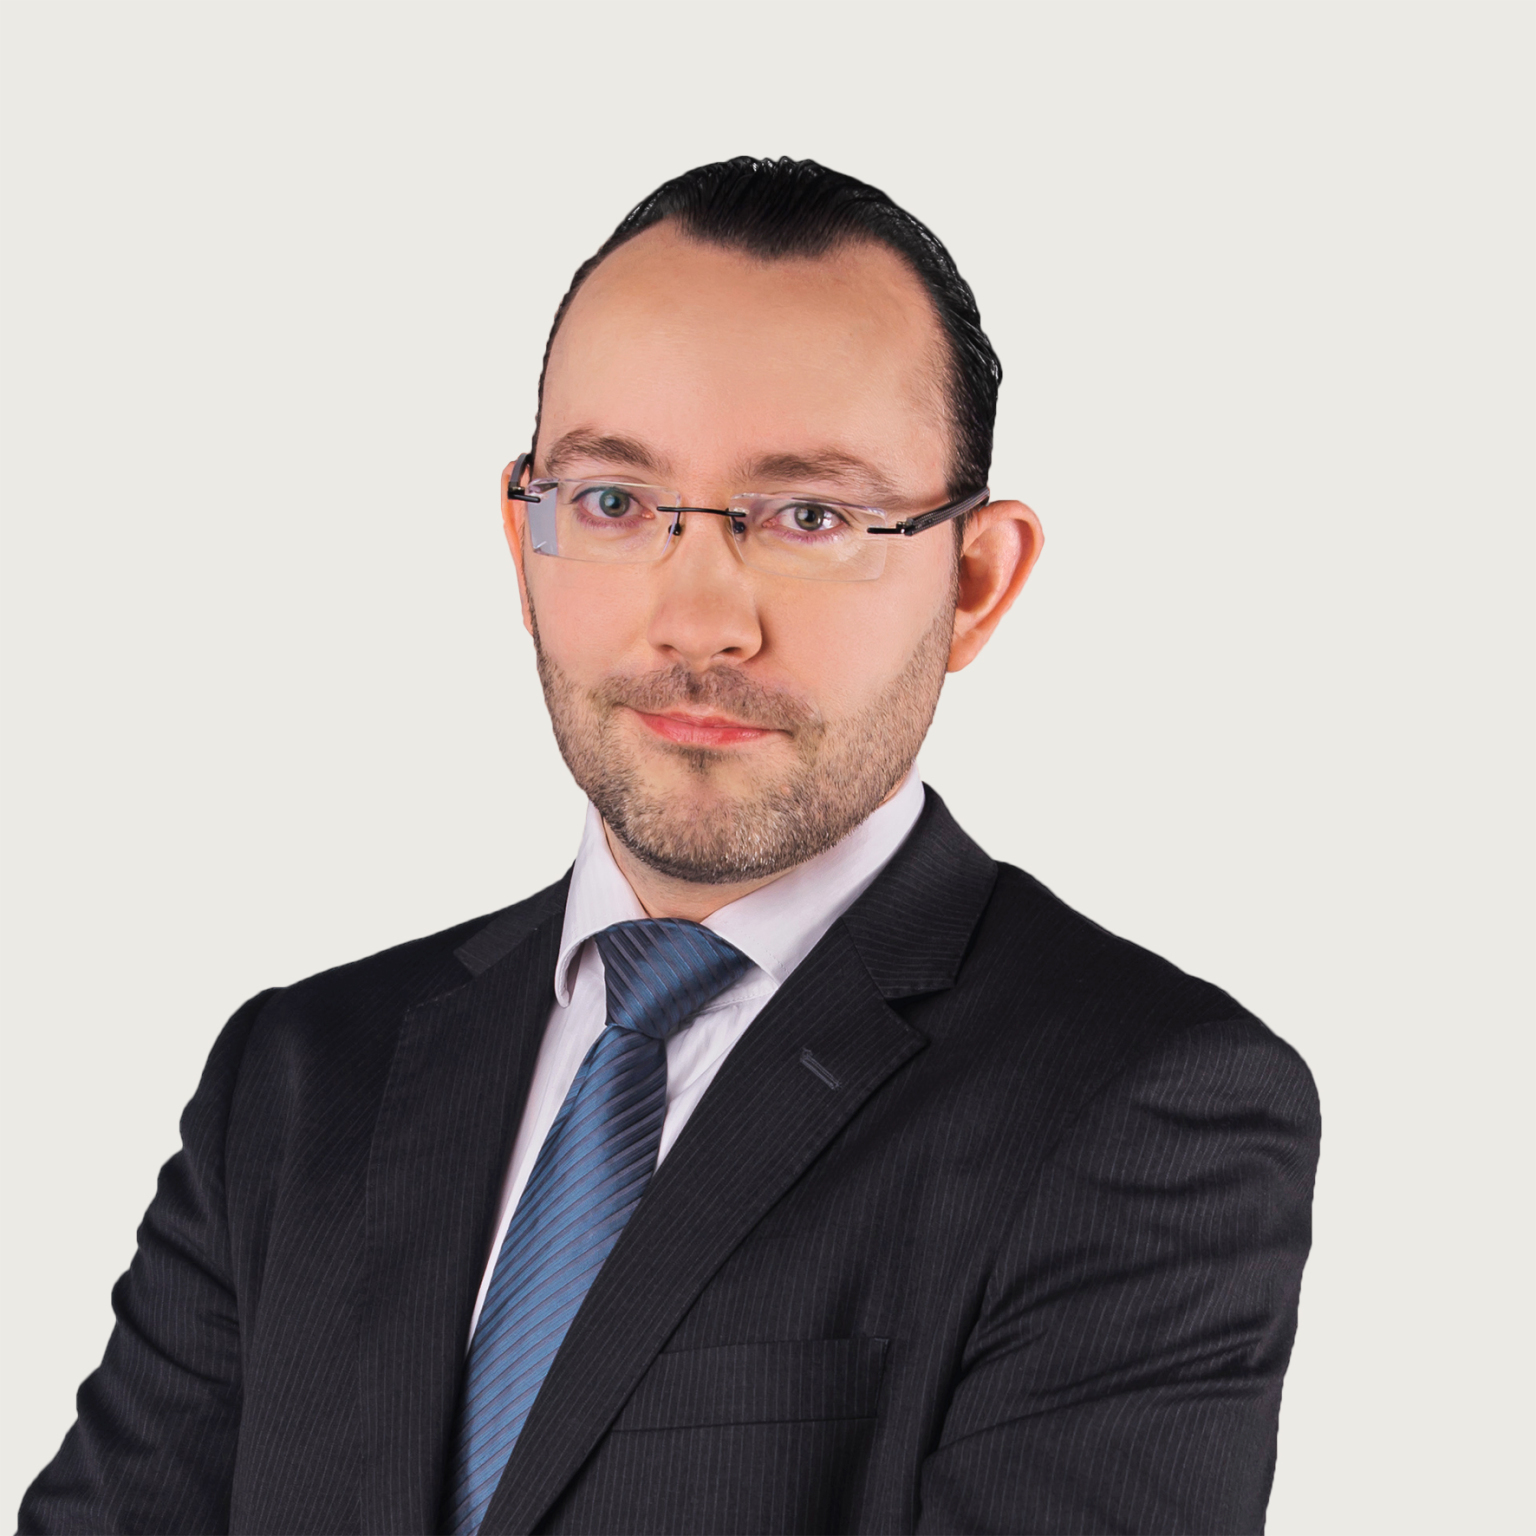 ciaran-mccormack-regional-director-for-the-middle-east-linesight